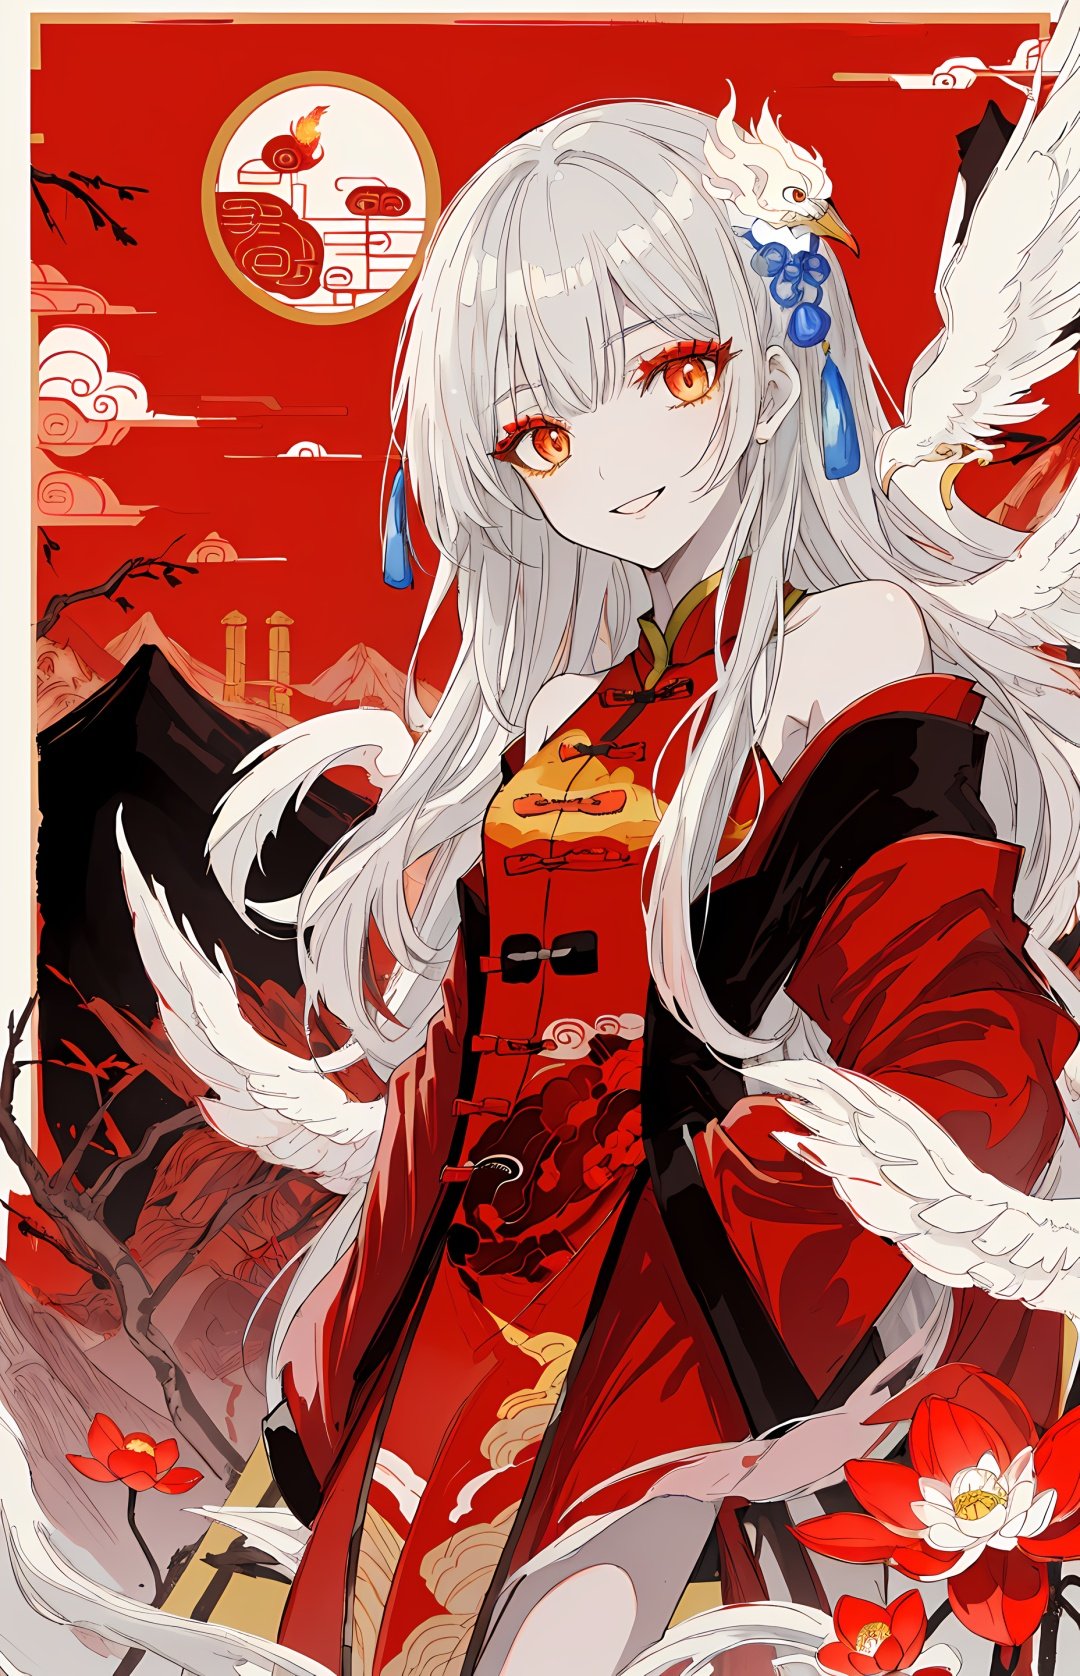 (Chinese girl:1.35),((red and yellow:0.85) but Limited palette:1.2),//,Chinese architecture,Ink,hair flowers,bamboo forest,bamboo,//(long hair),white hair,(loli),small breasts,upper body,smile,((phoenix)),fire,(makeup,red eyeliner),red eyeshadow,red eyes,(long eyelashes),half-closed eyes,peacock skirt,growth,leaf,tree,branch,peacock feathers,bare shoulders,bare legs,(chinese knot),( ink painting, ink splashes, ink wash),cloudy,cirrocumulus,mountains,lake,Chinese style architecture,(Yellow Crane Tower),chinese_trees,branch,(plum blossom),(lotus),petals,